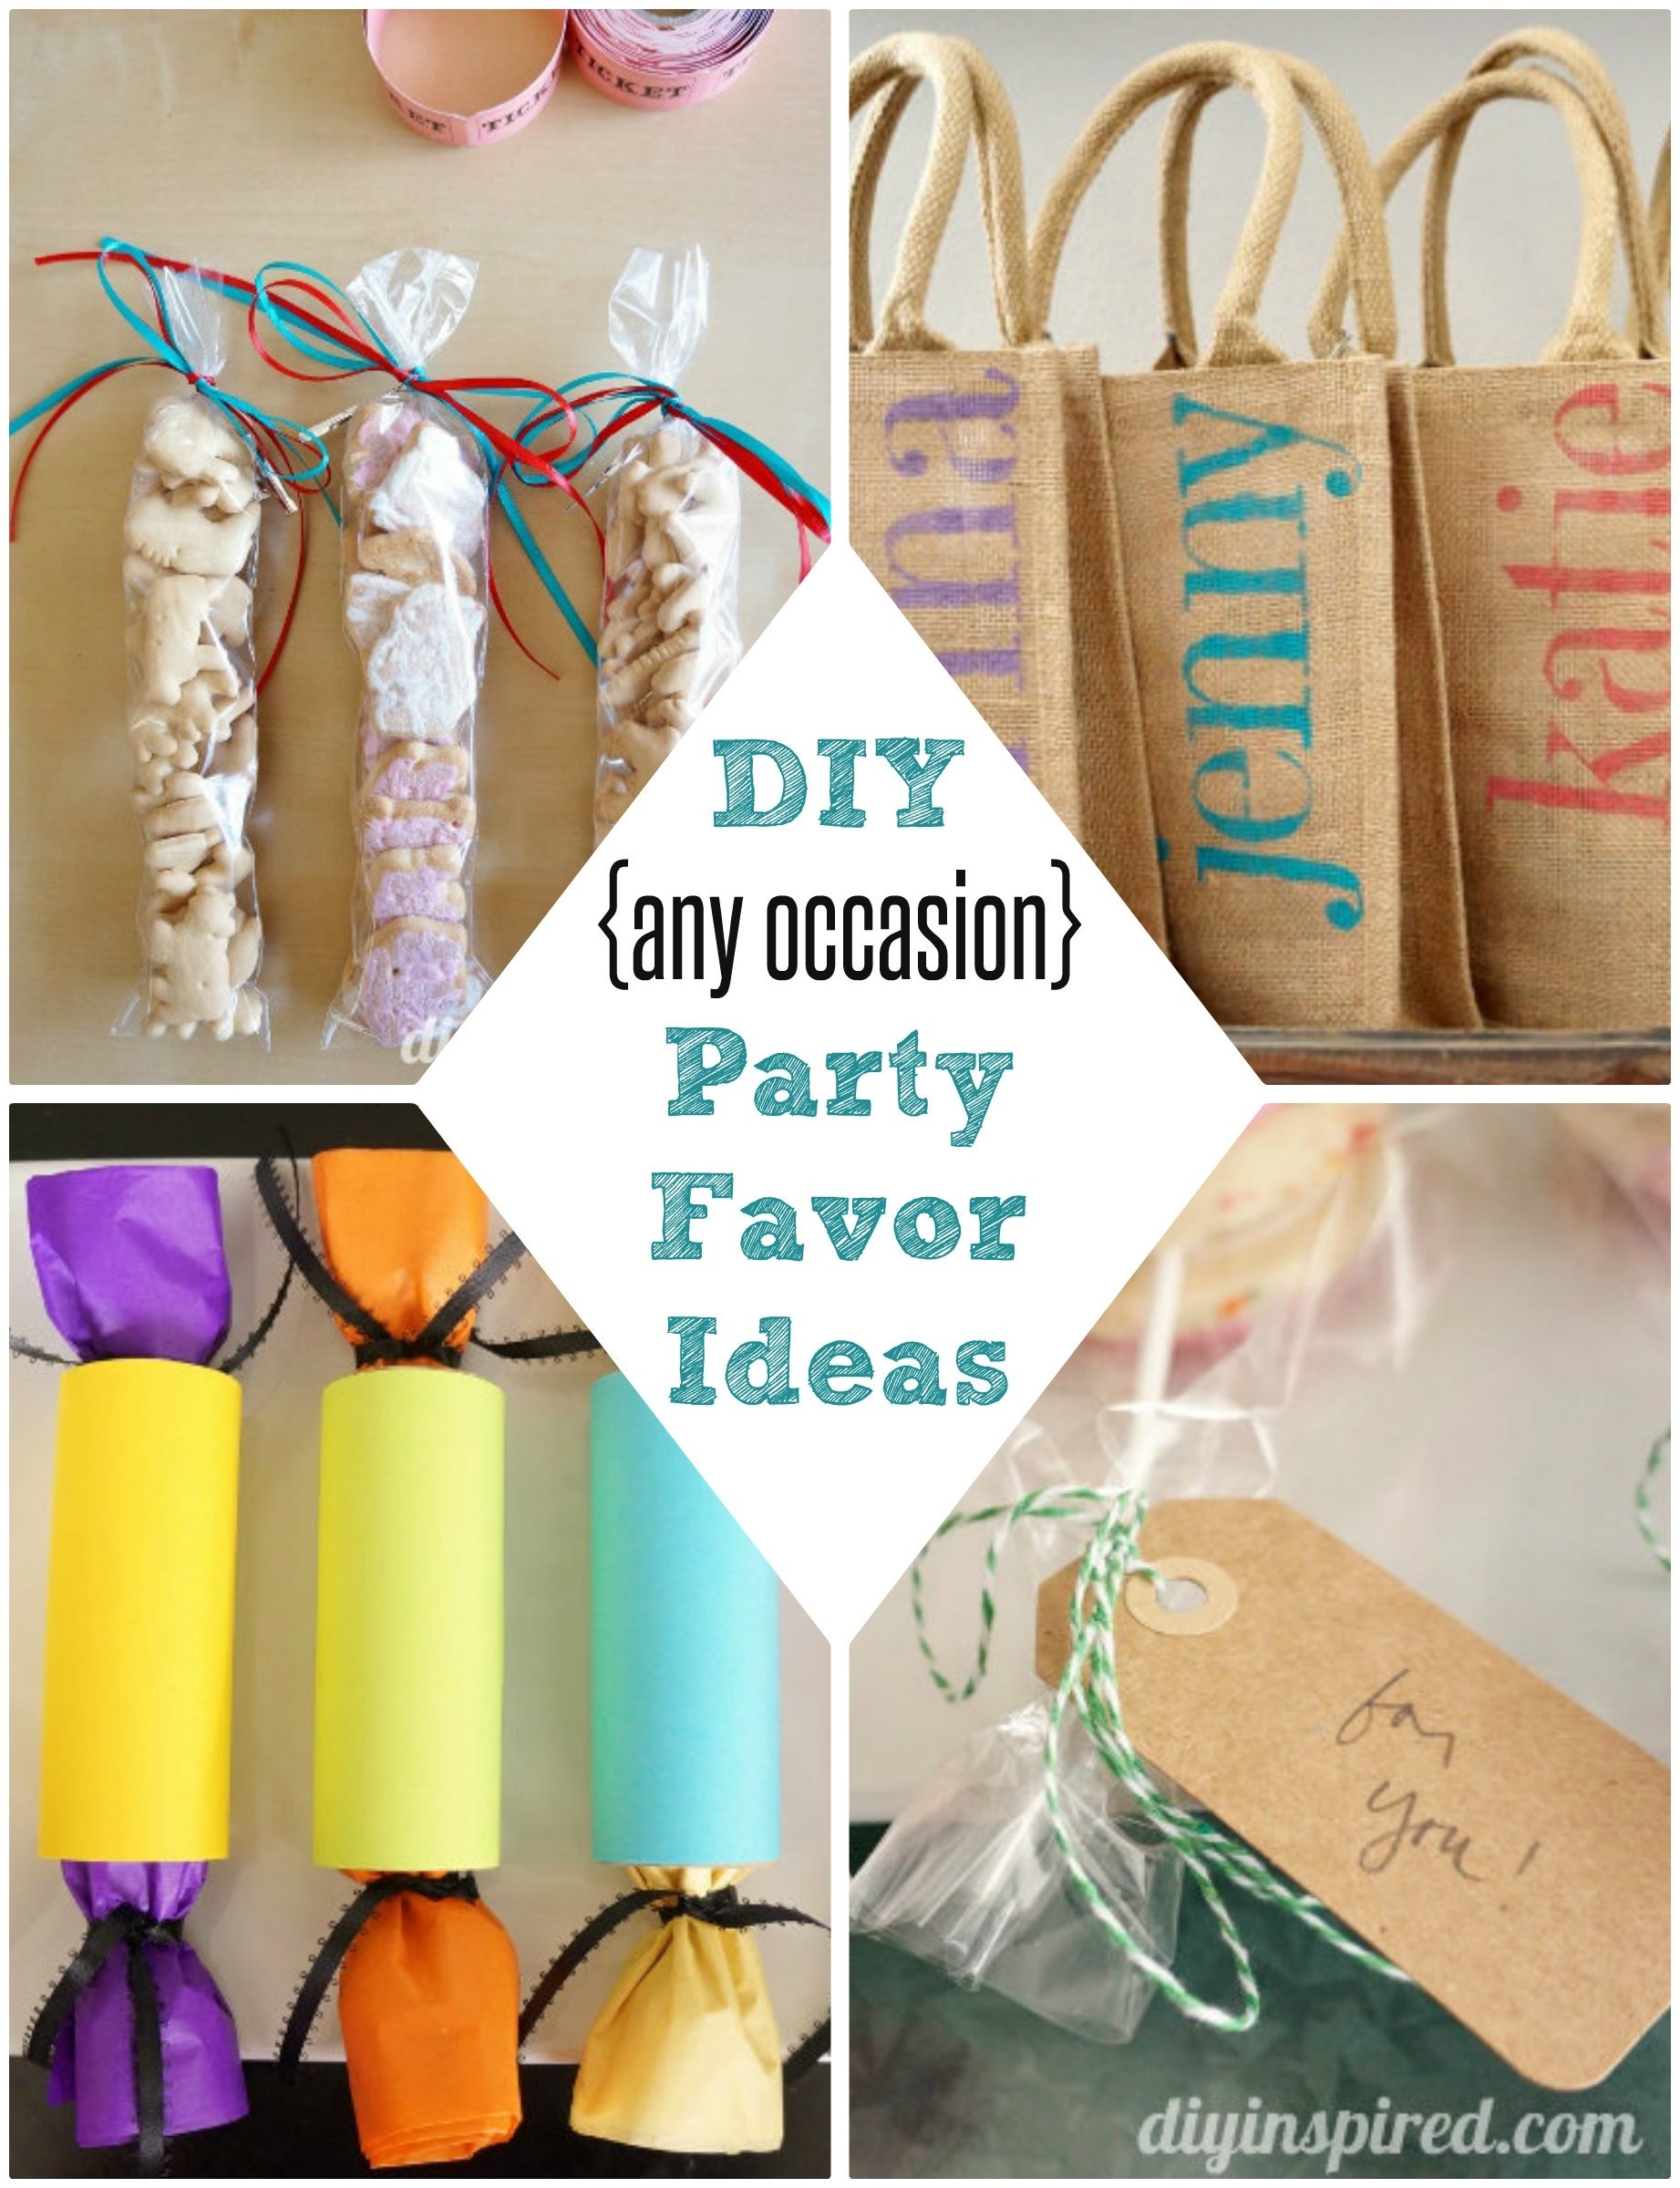 10 Best Party Favor Ideas For Adults homemade party favors for adults diy party favor ideas diy 2022